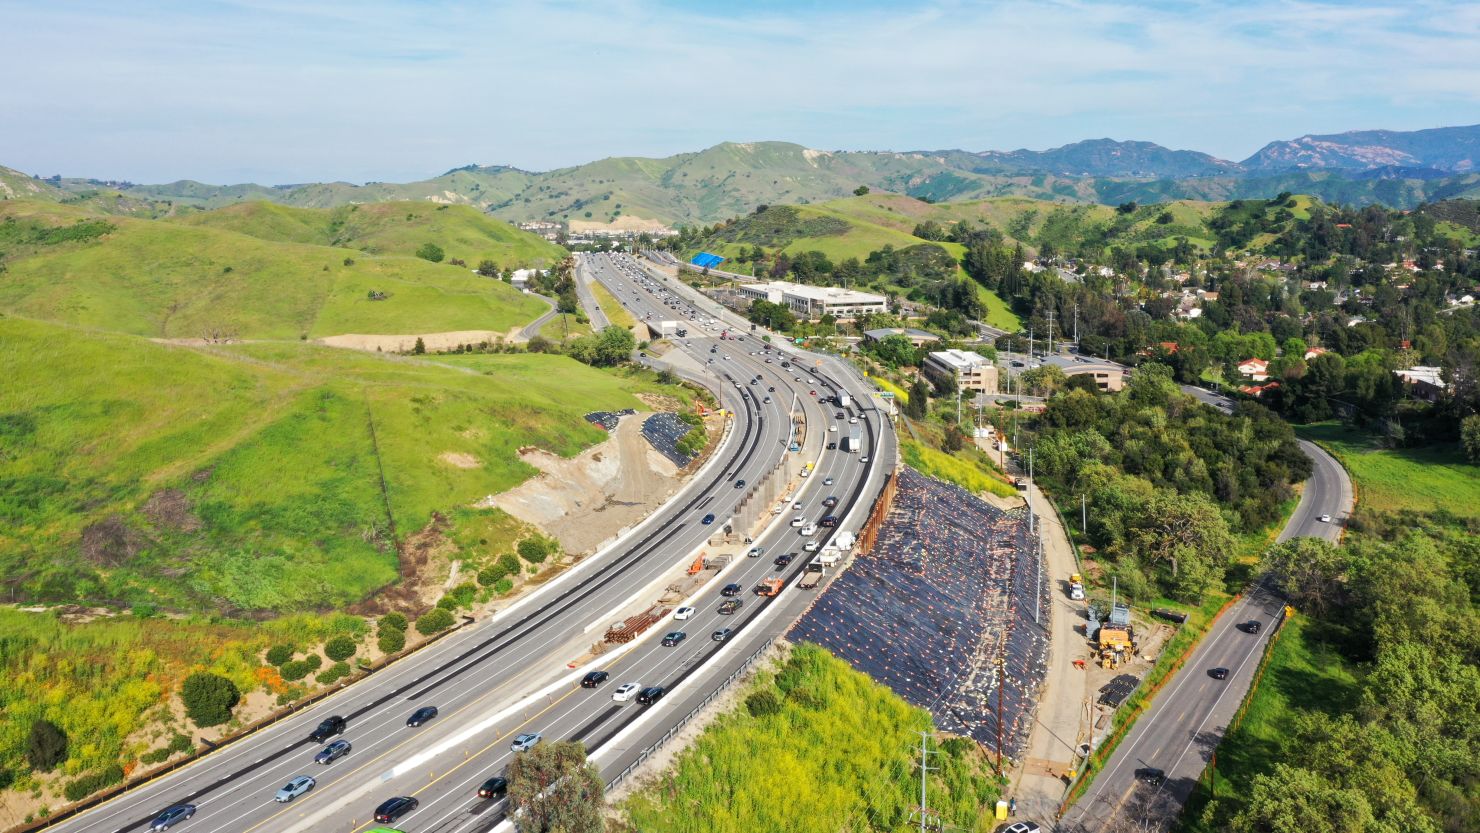 The Wallis Annenberg Wildlife Crossing will offer safe passage for animals, reptiles and insects over the 101 Freeway